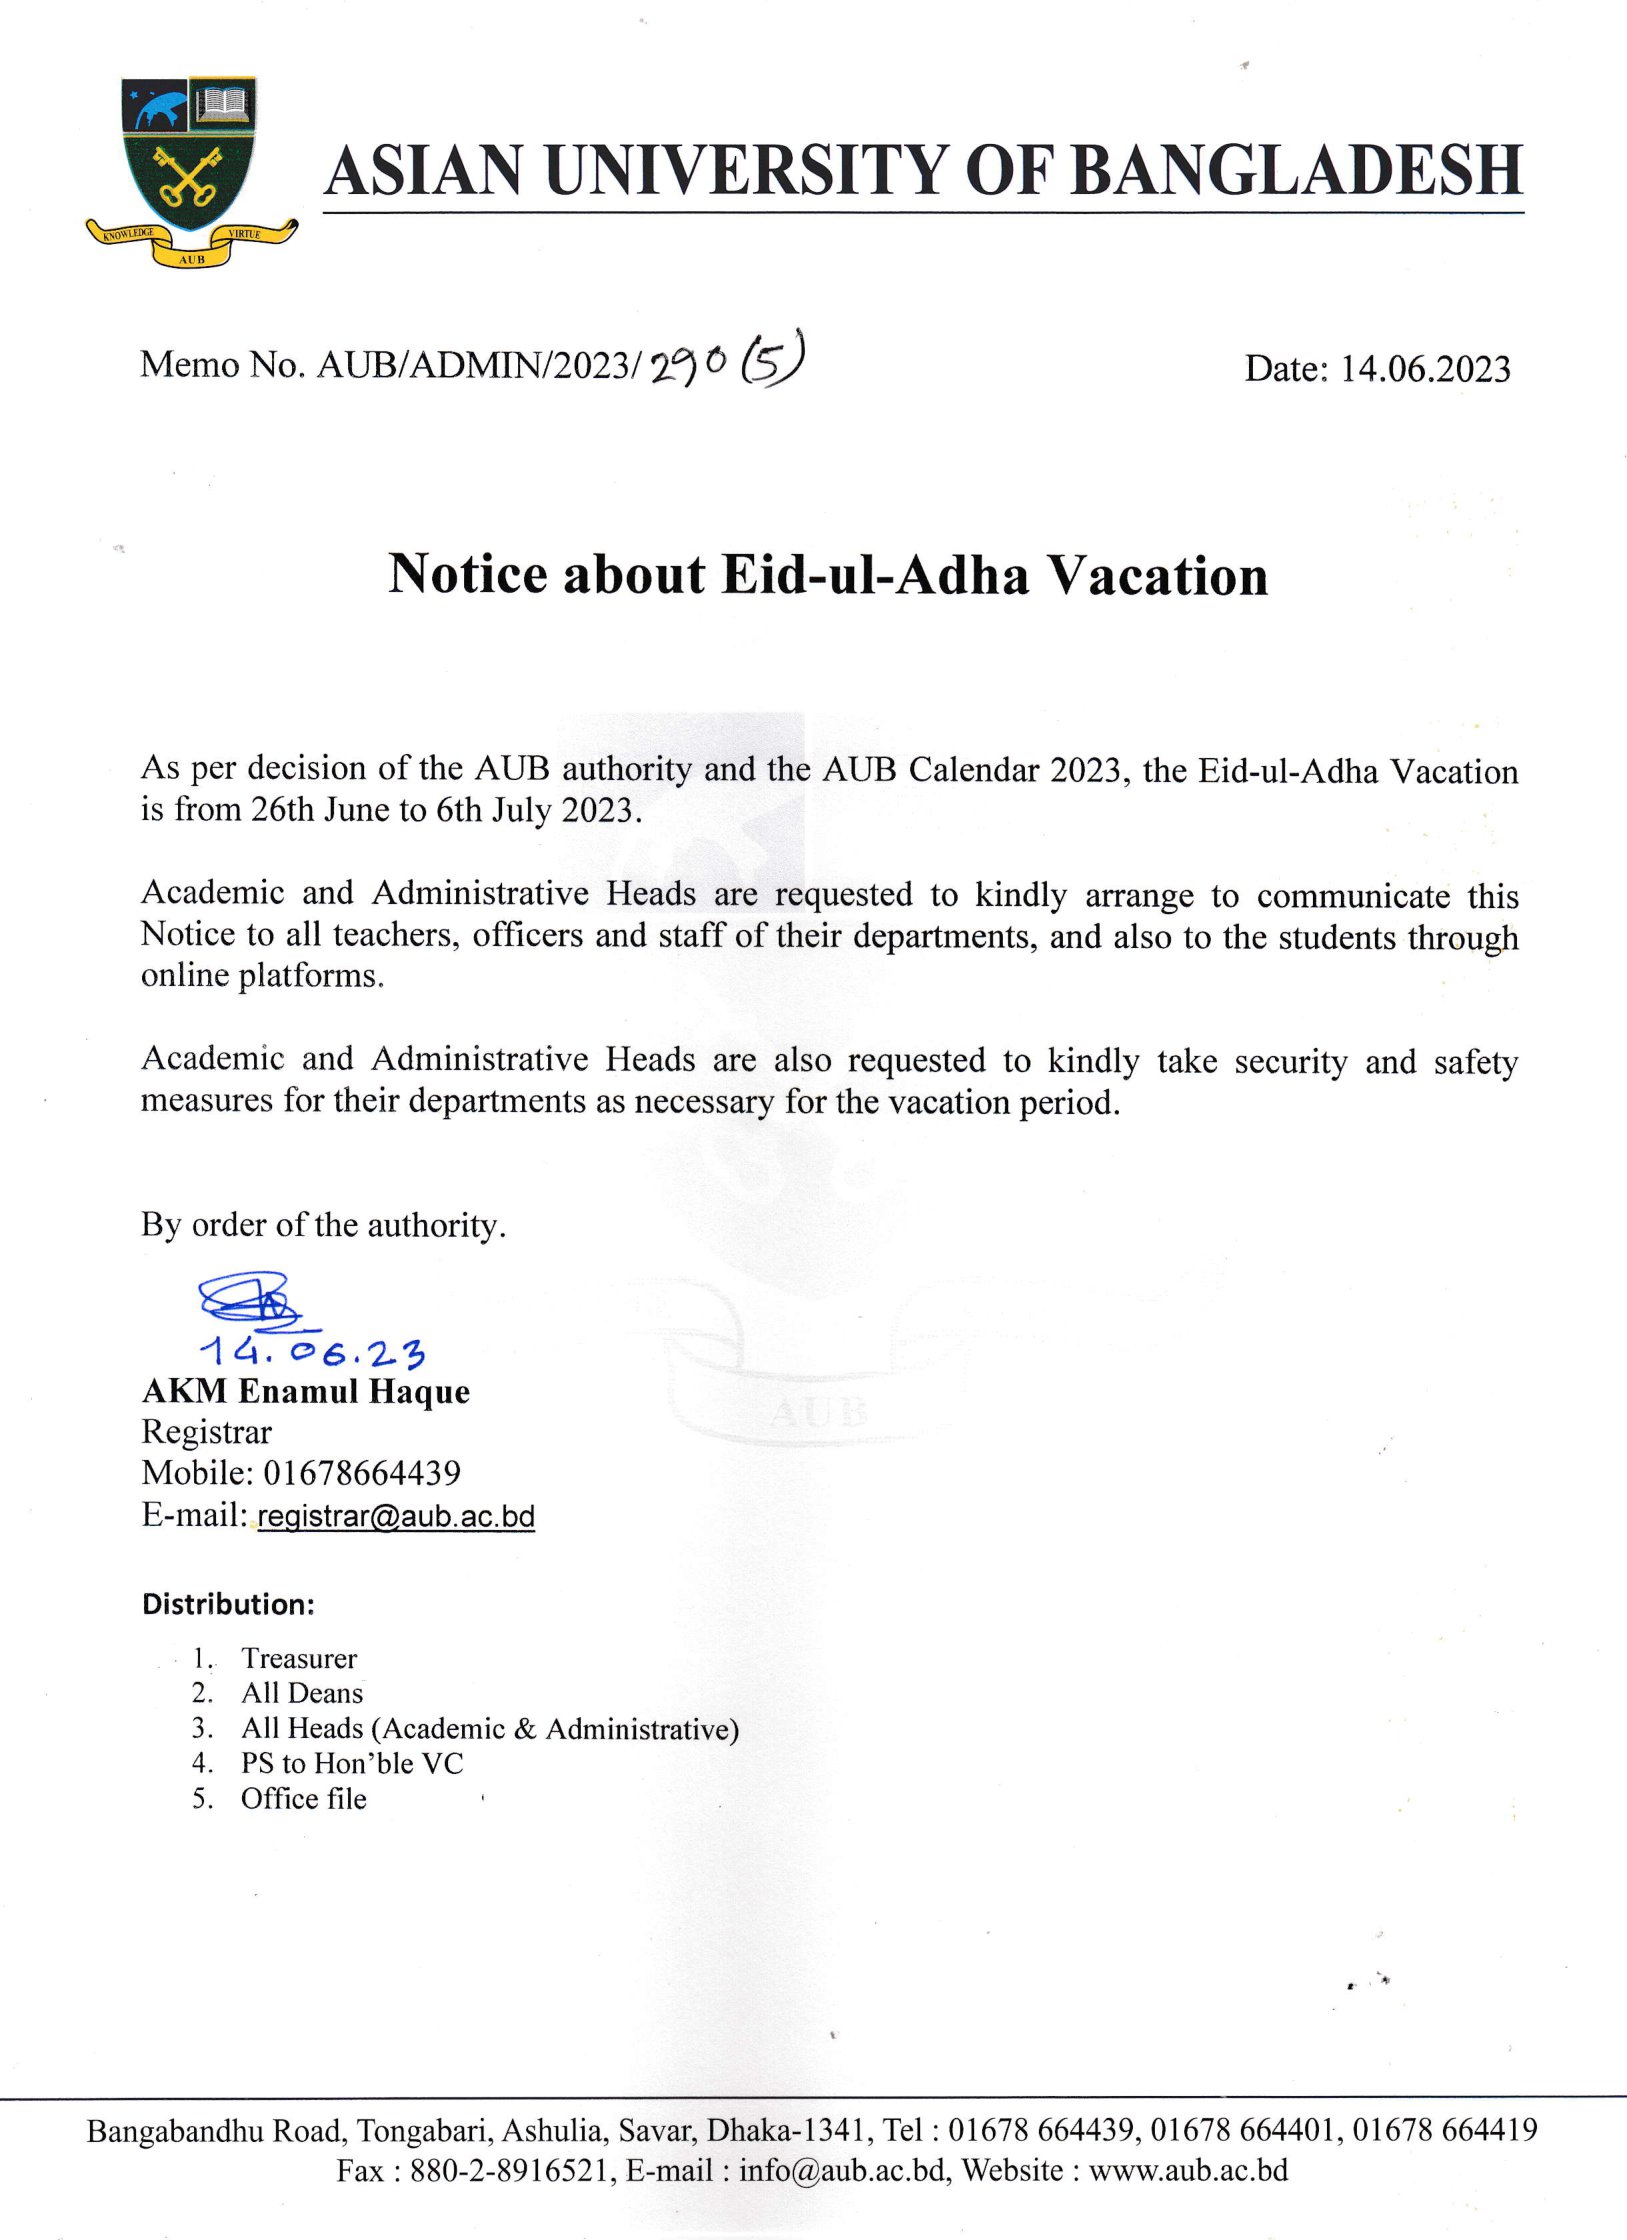 Notice about Eid-ul-Adha 2023 vacation image